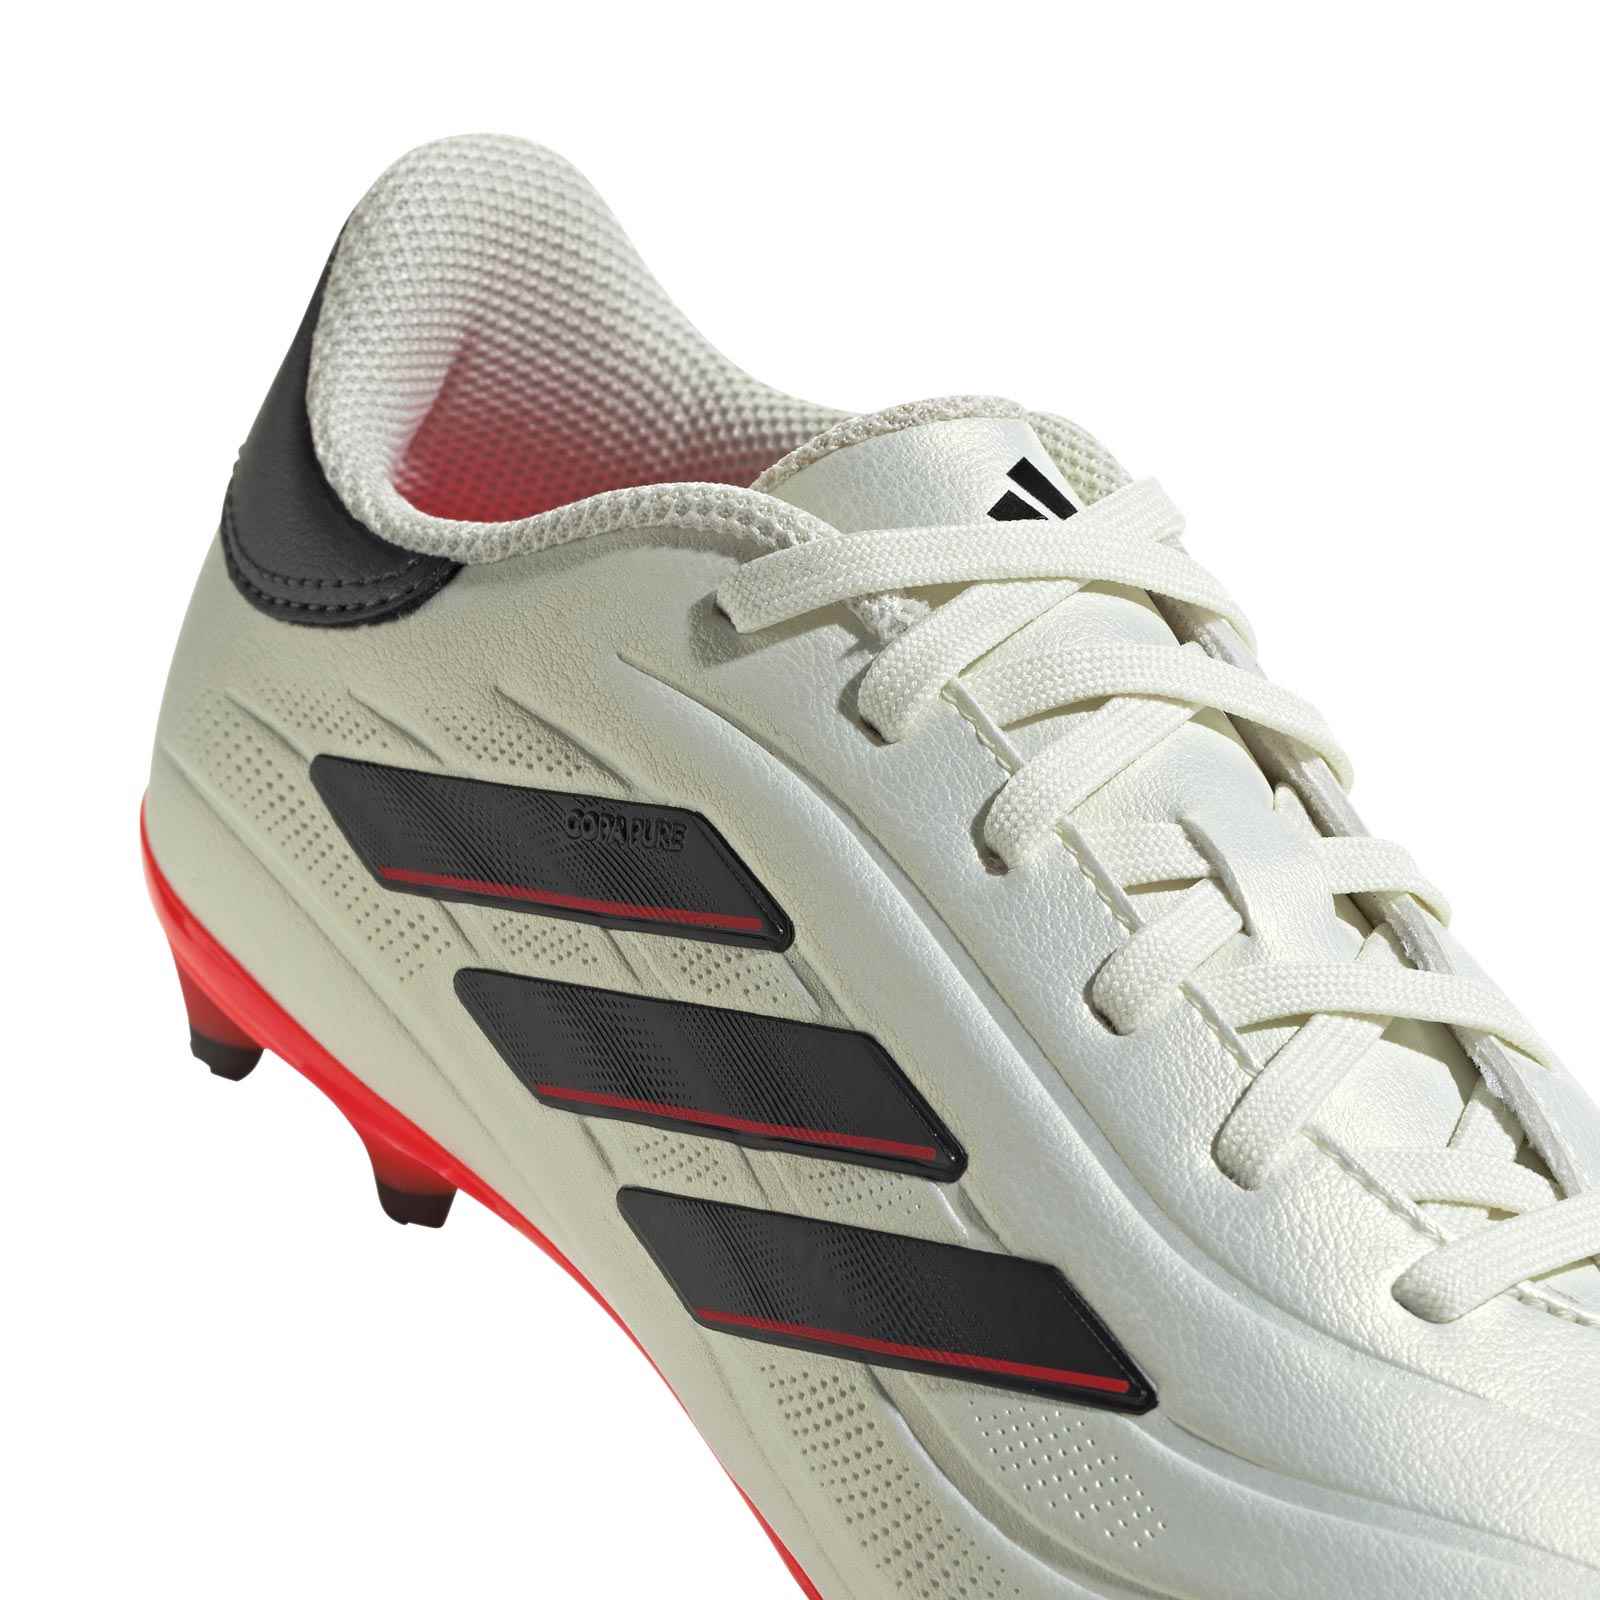 ADIDAS COPA PURE 2 LEAGUE FIRM GROUND KIDS FOOTBALL BOOTS